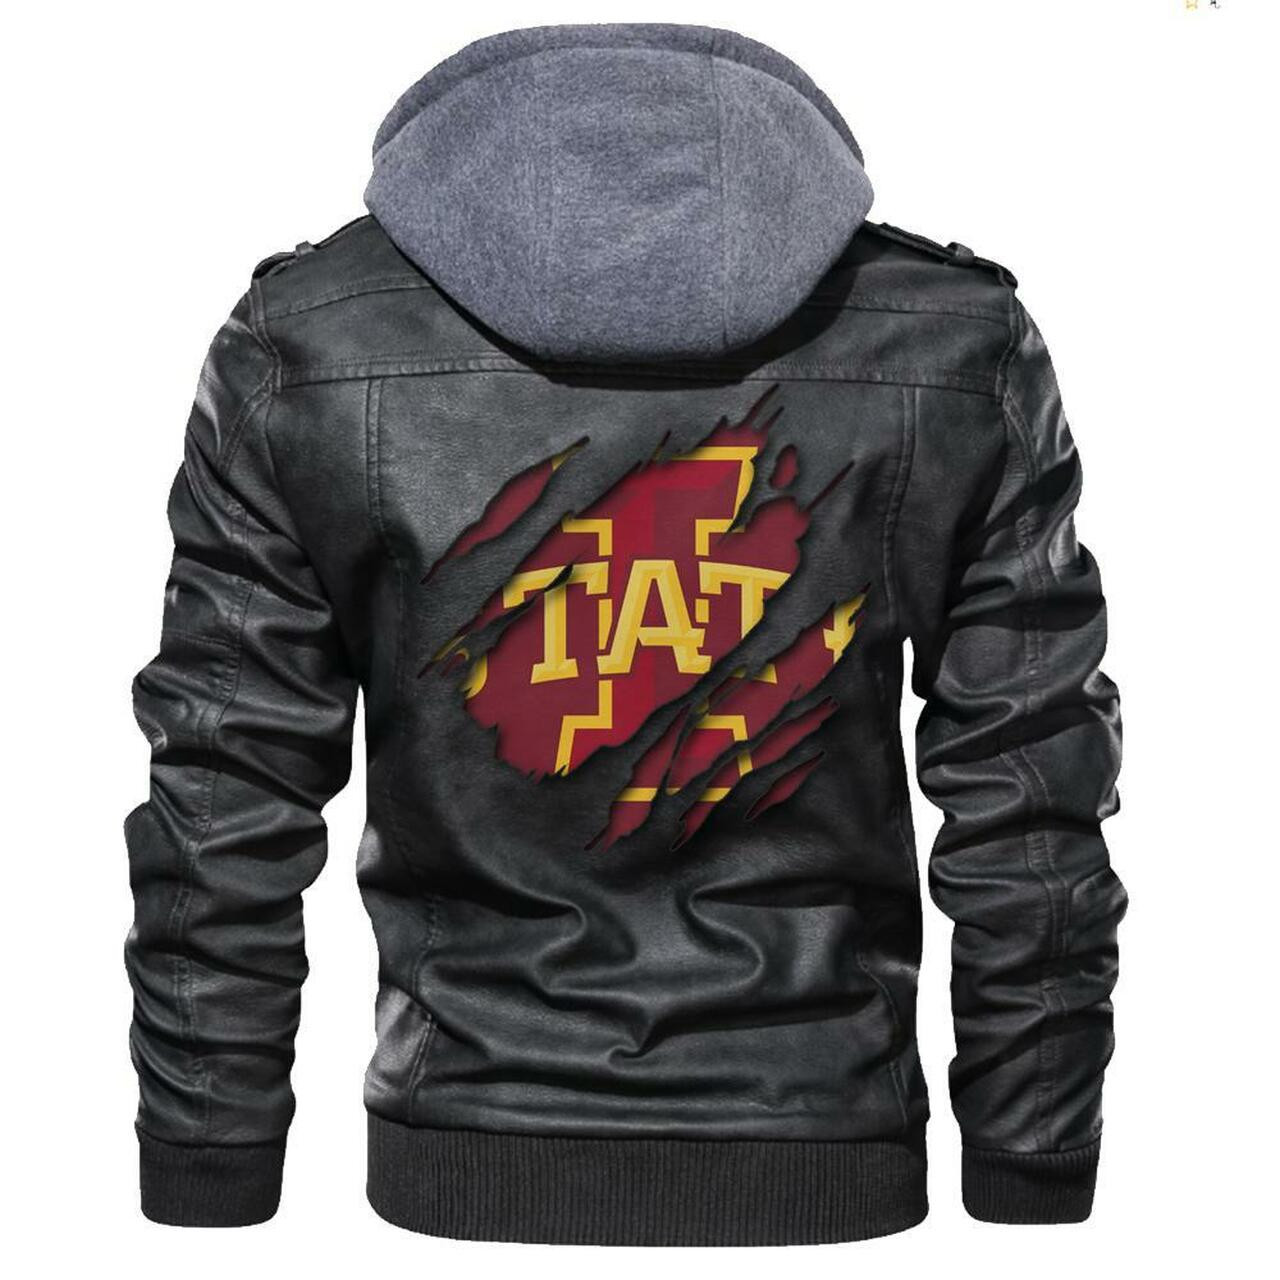 Top leather jackets are the perfect choice for the active man. 323